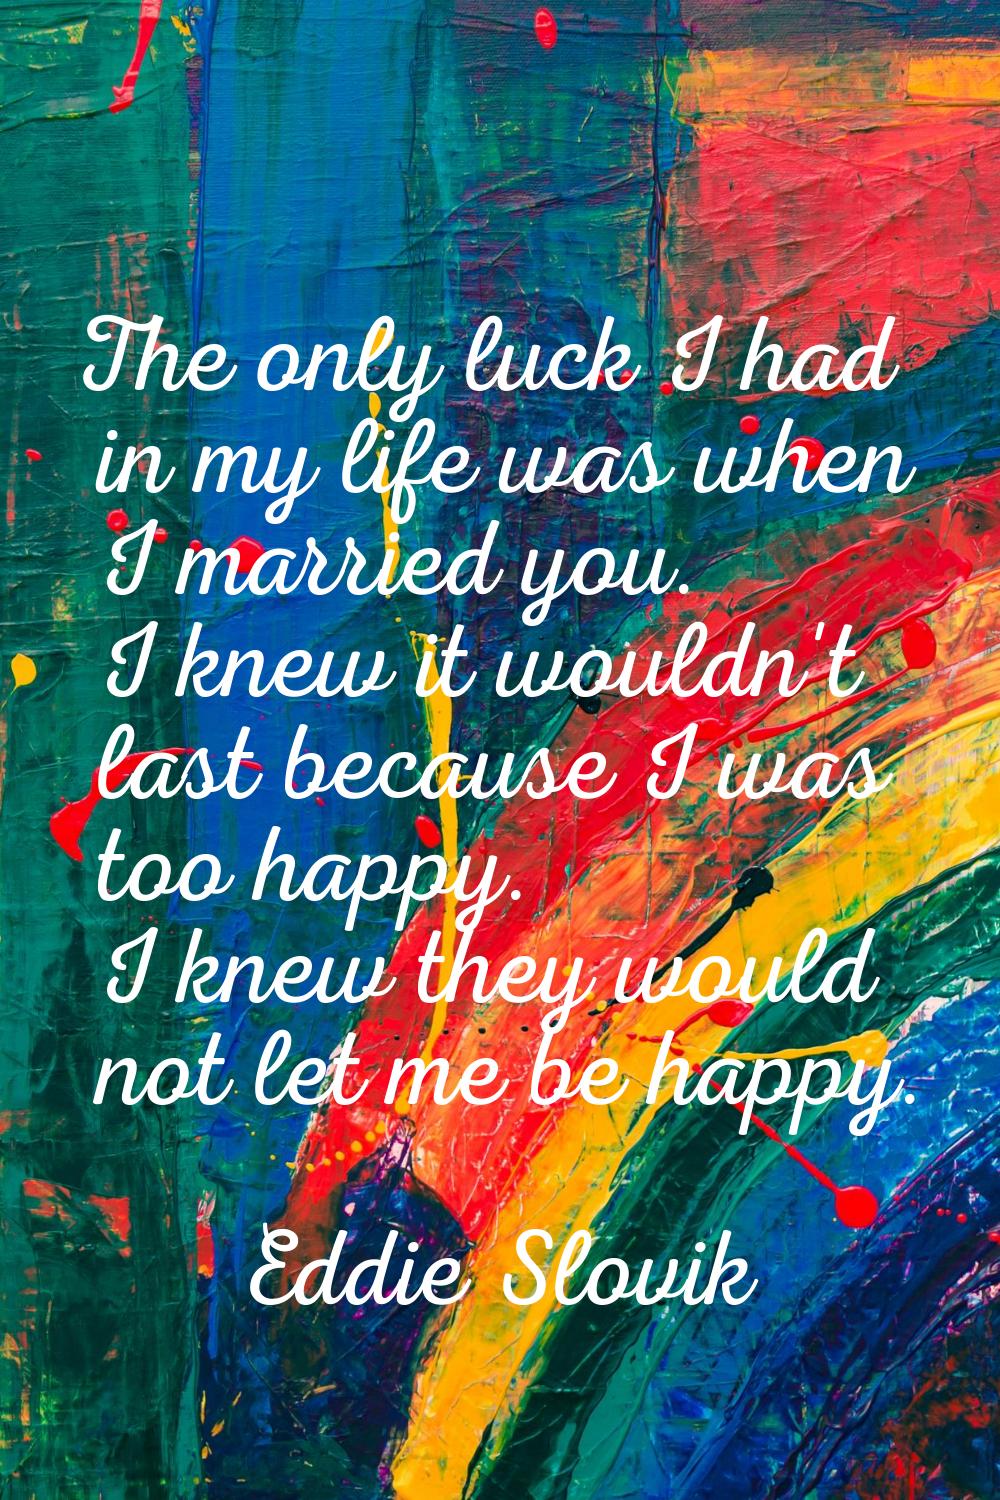 The only luck I had in my life was when I married you. I knew it wouldn't last because I was too ha